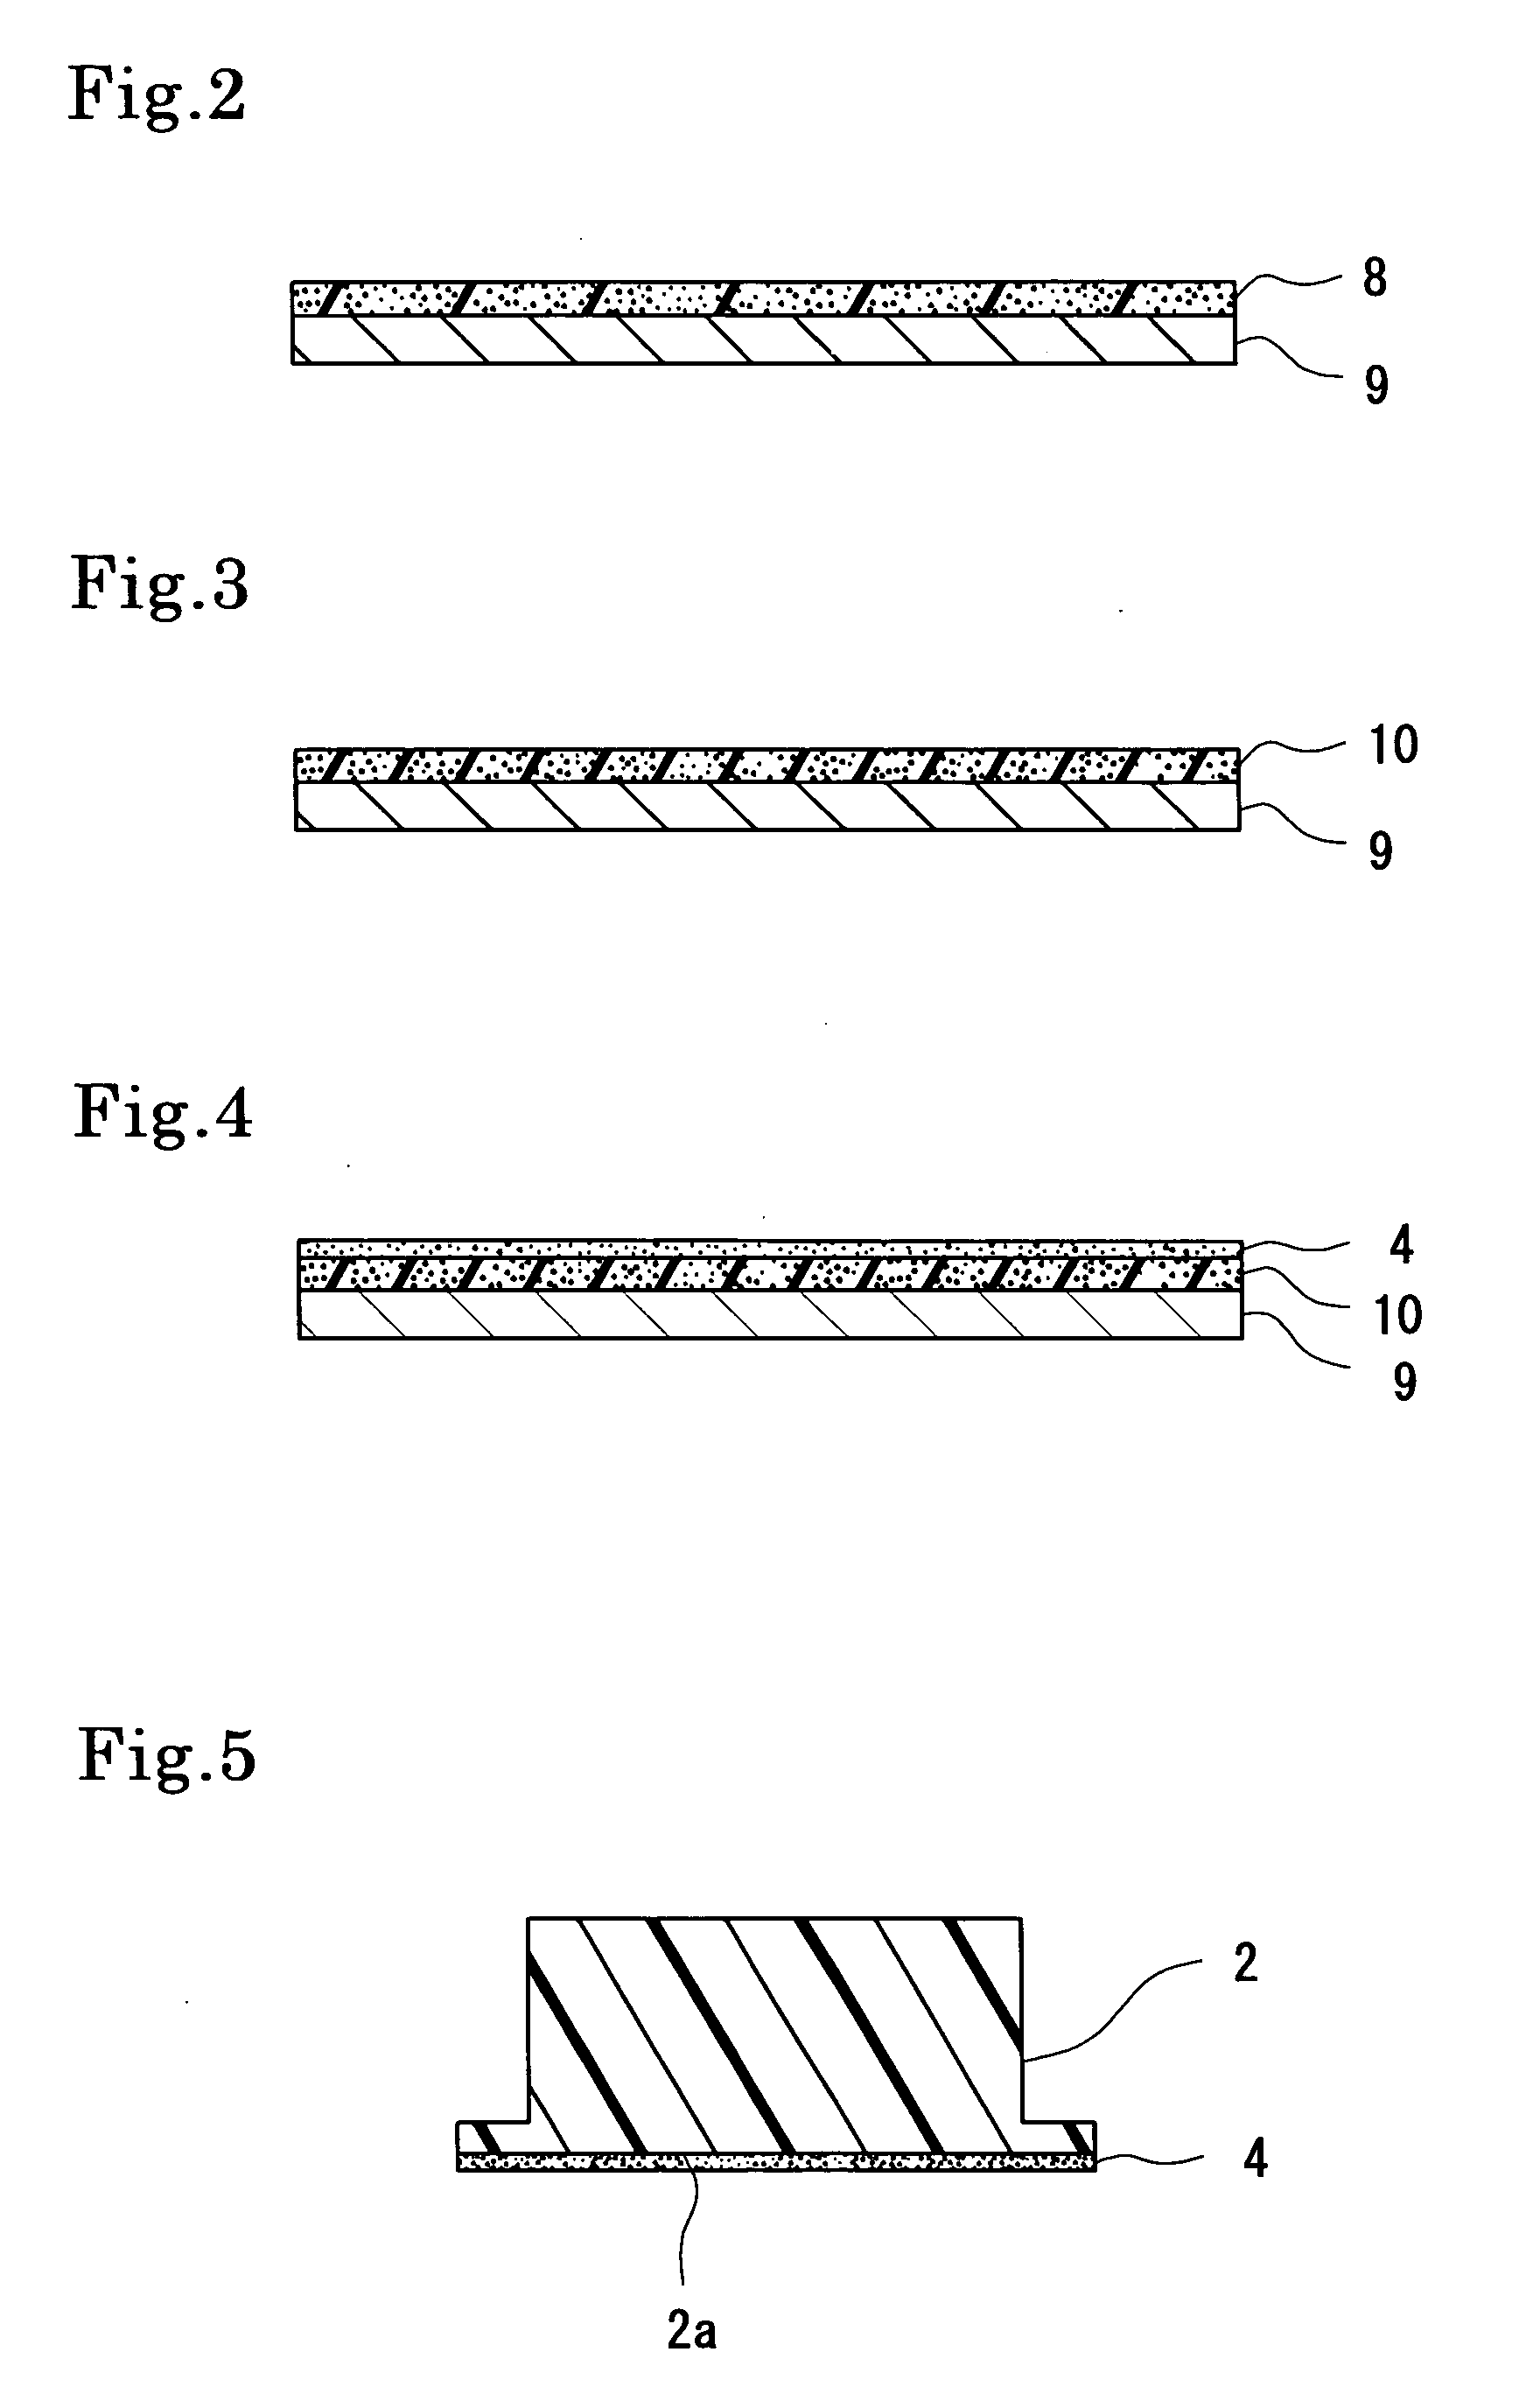 Decorative molded object having color design image and method of producing the same